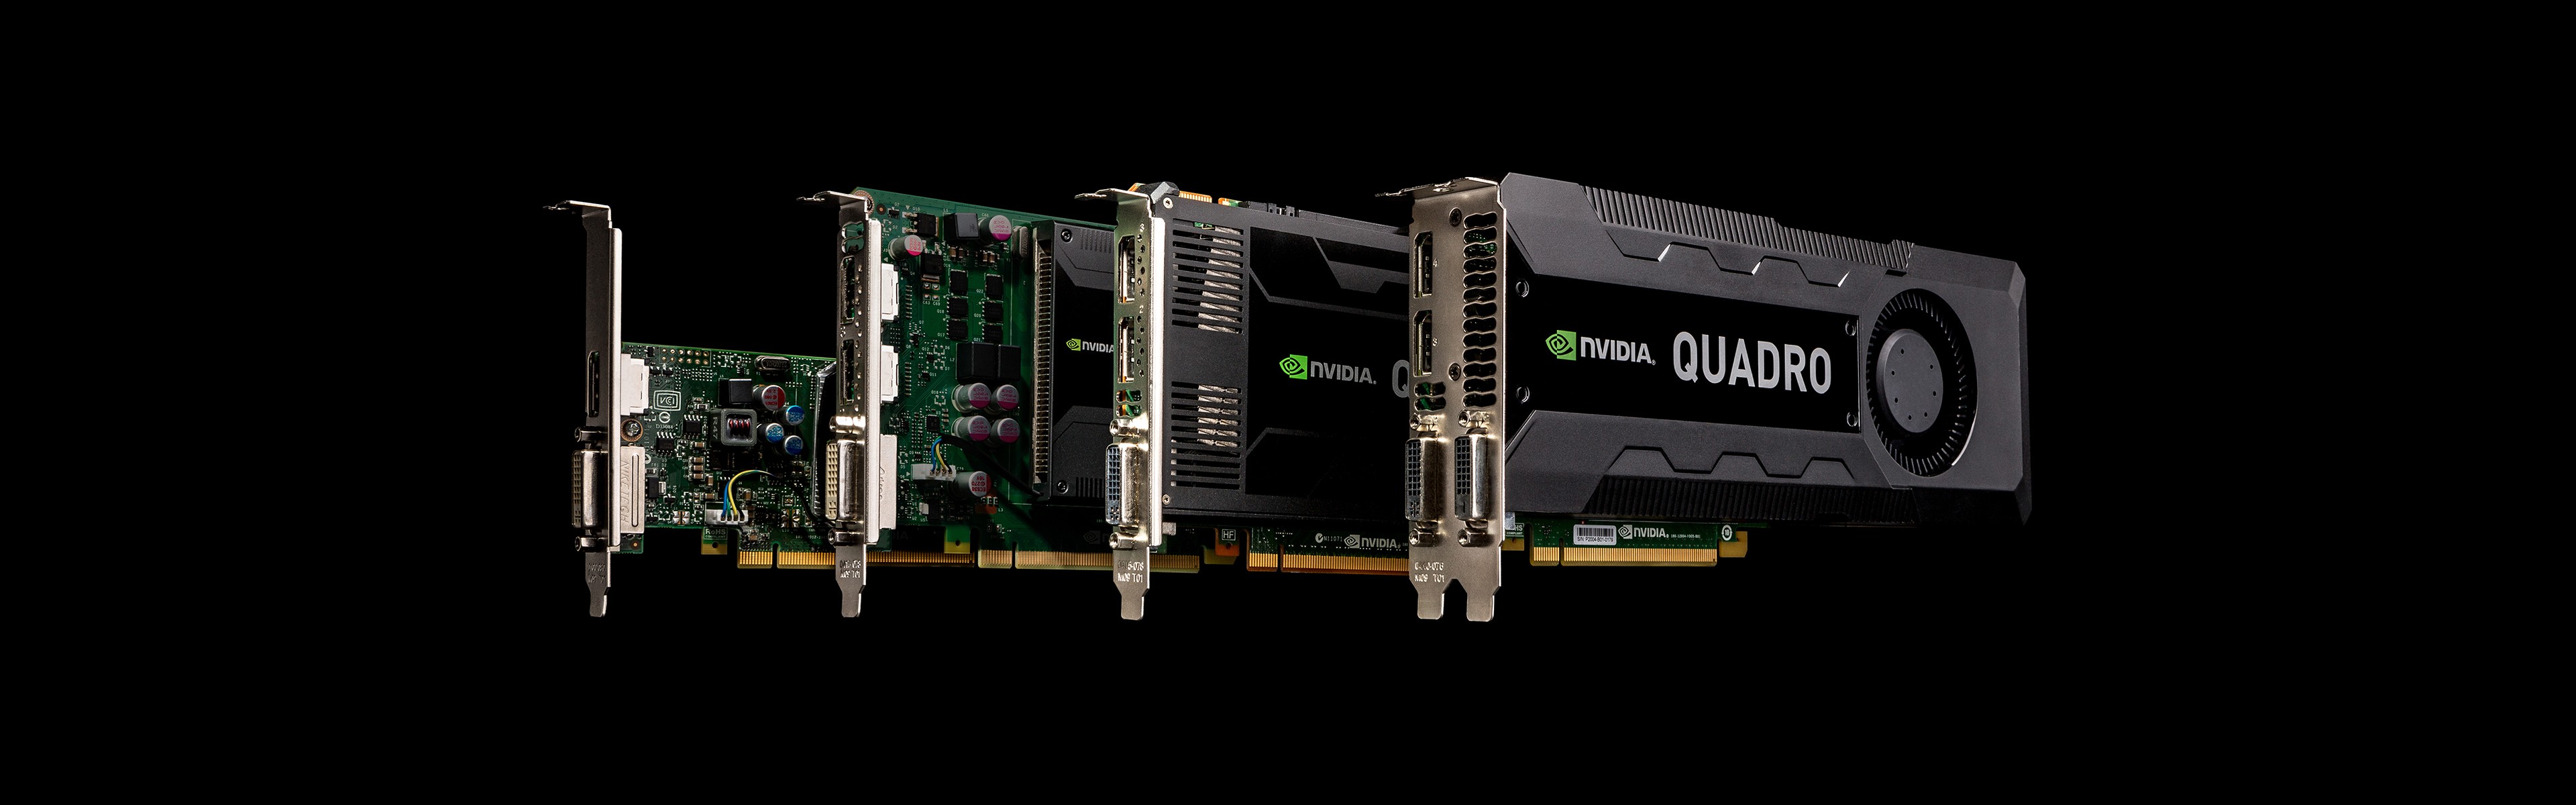 Nvidia GPUs Computer Simple Background Multiple Display Technology PC Gaming Graphics Card 3840x1200